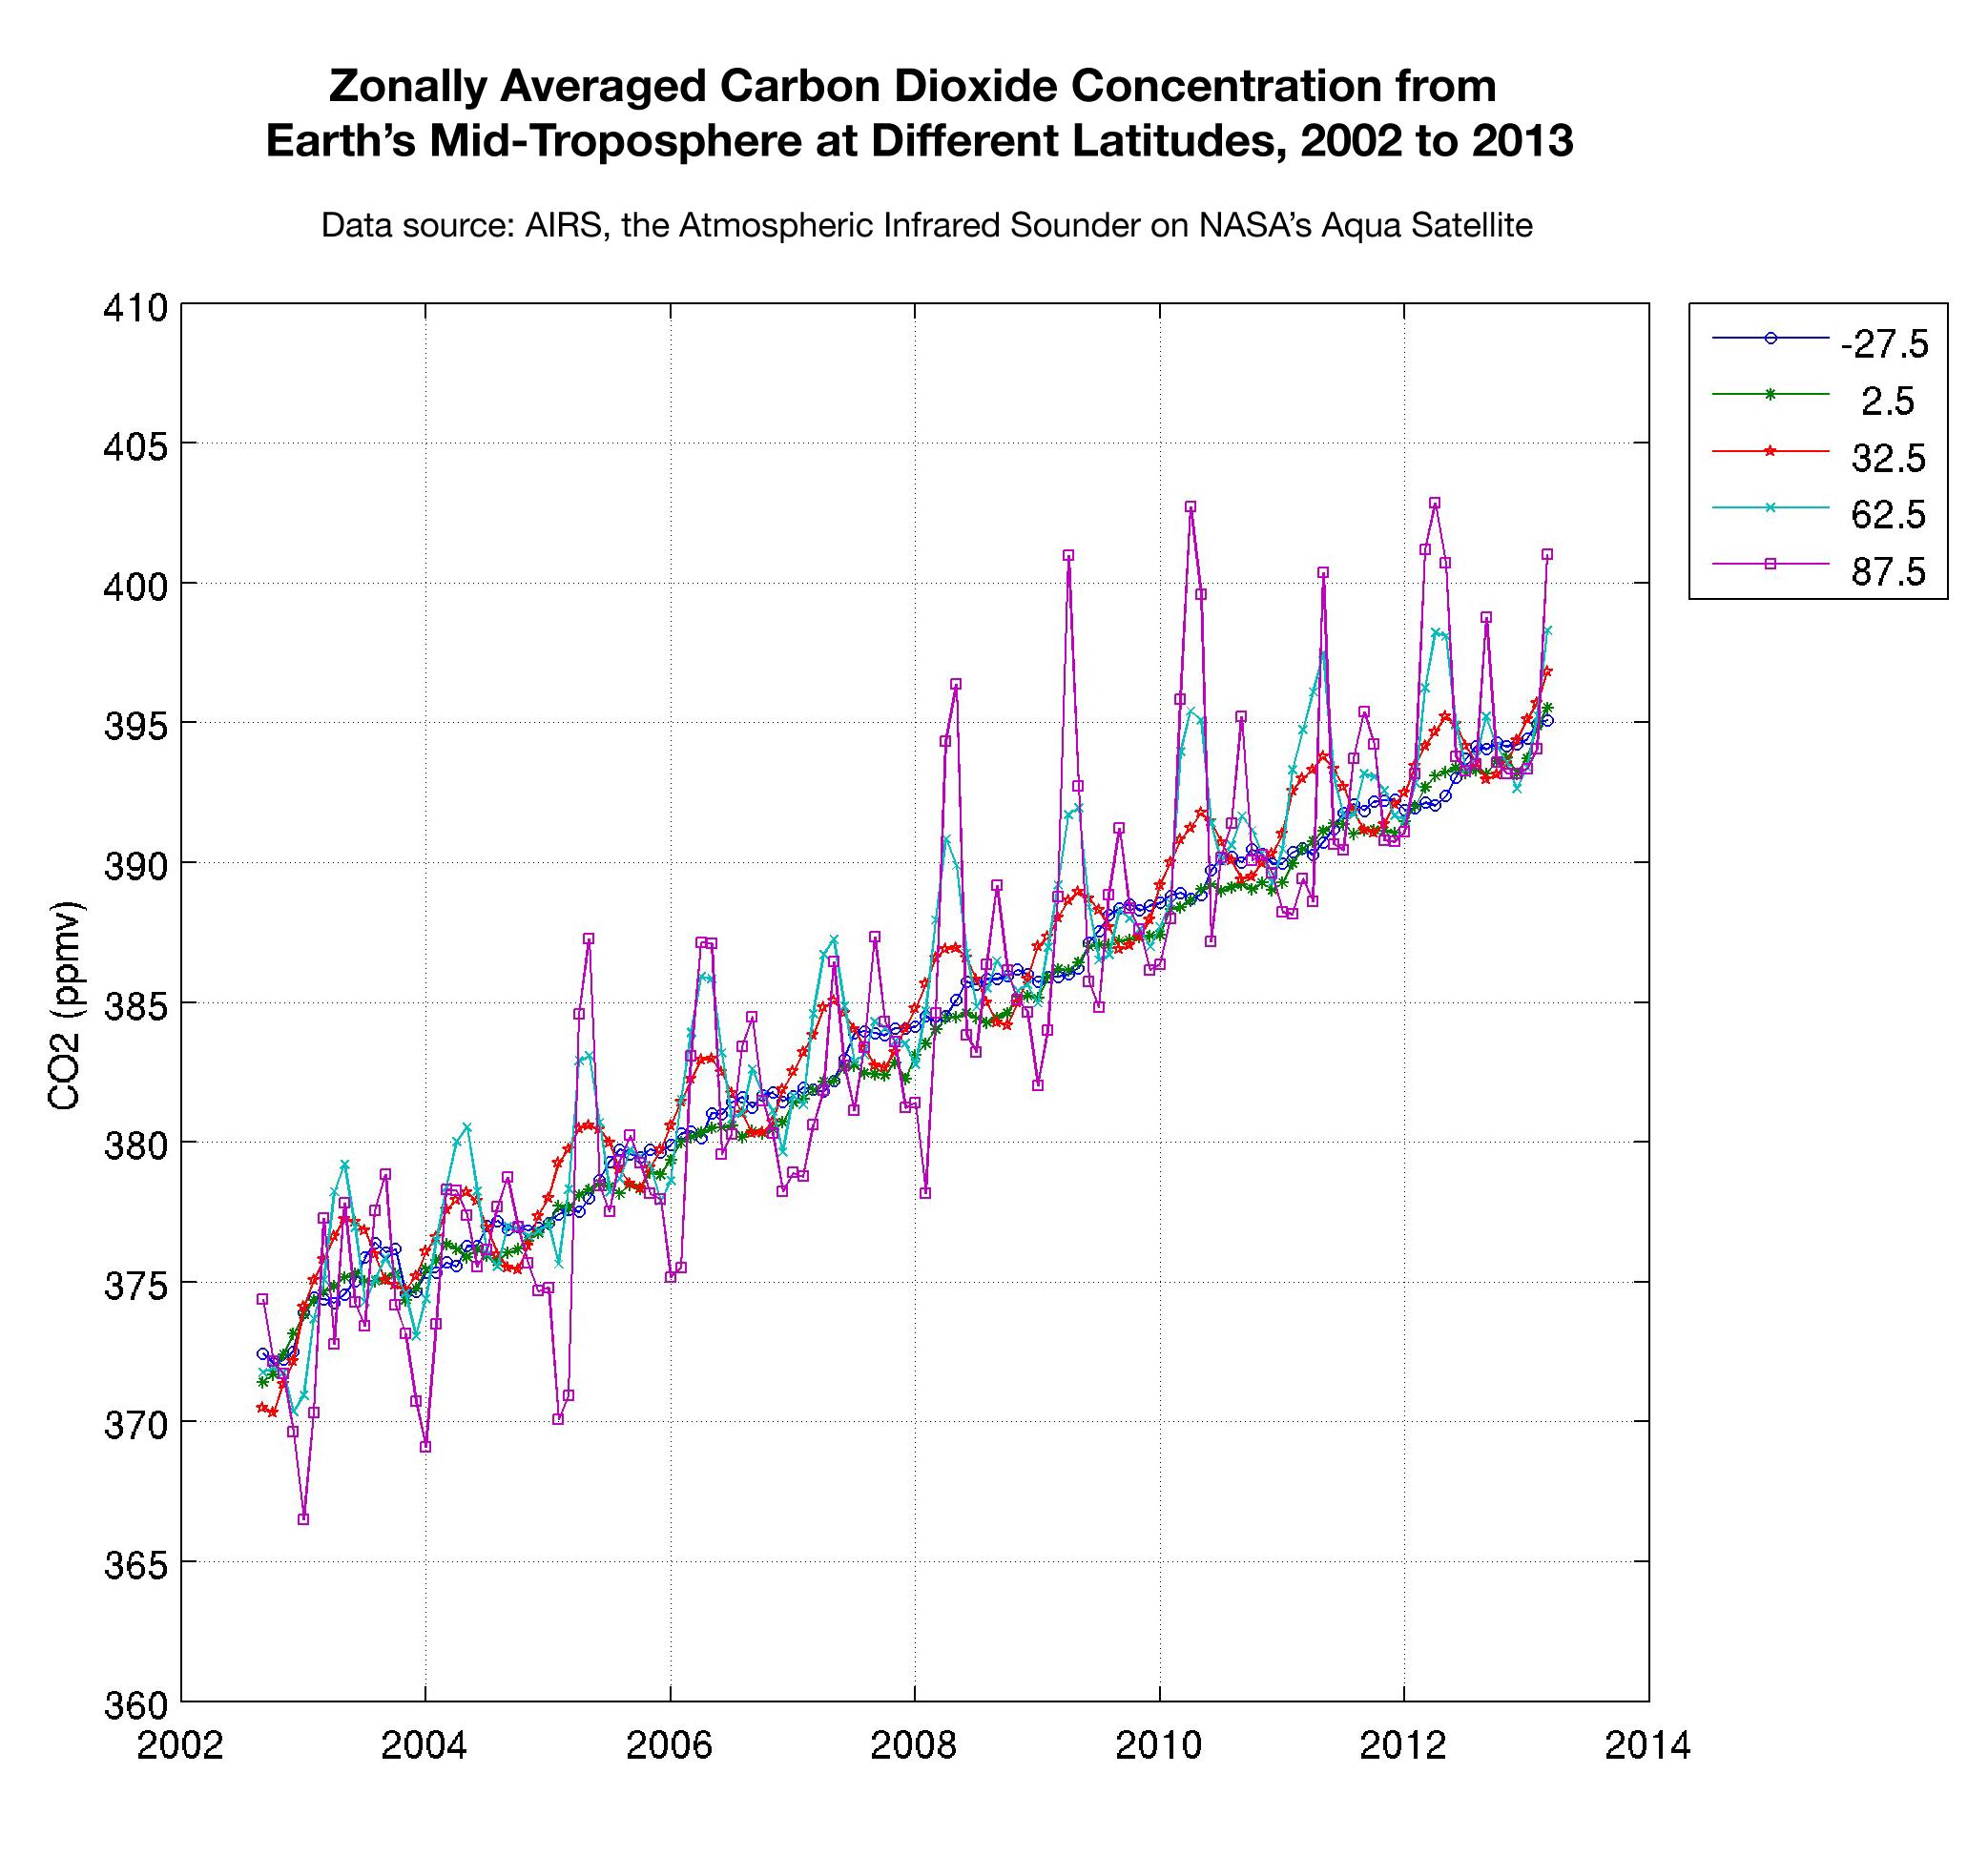 Zonally Averaged Carbon Dioxide Concentration from Earth's Mid-Troposphere at Different Latitudes, 2002 to 2013